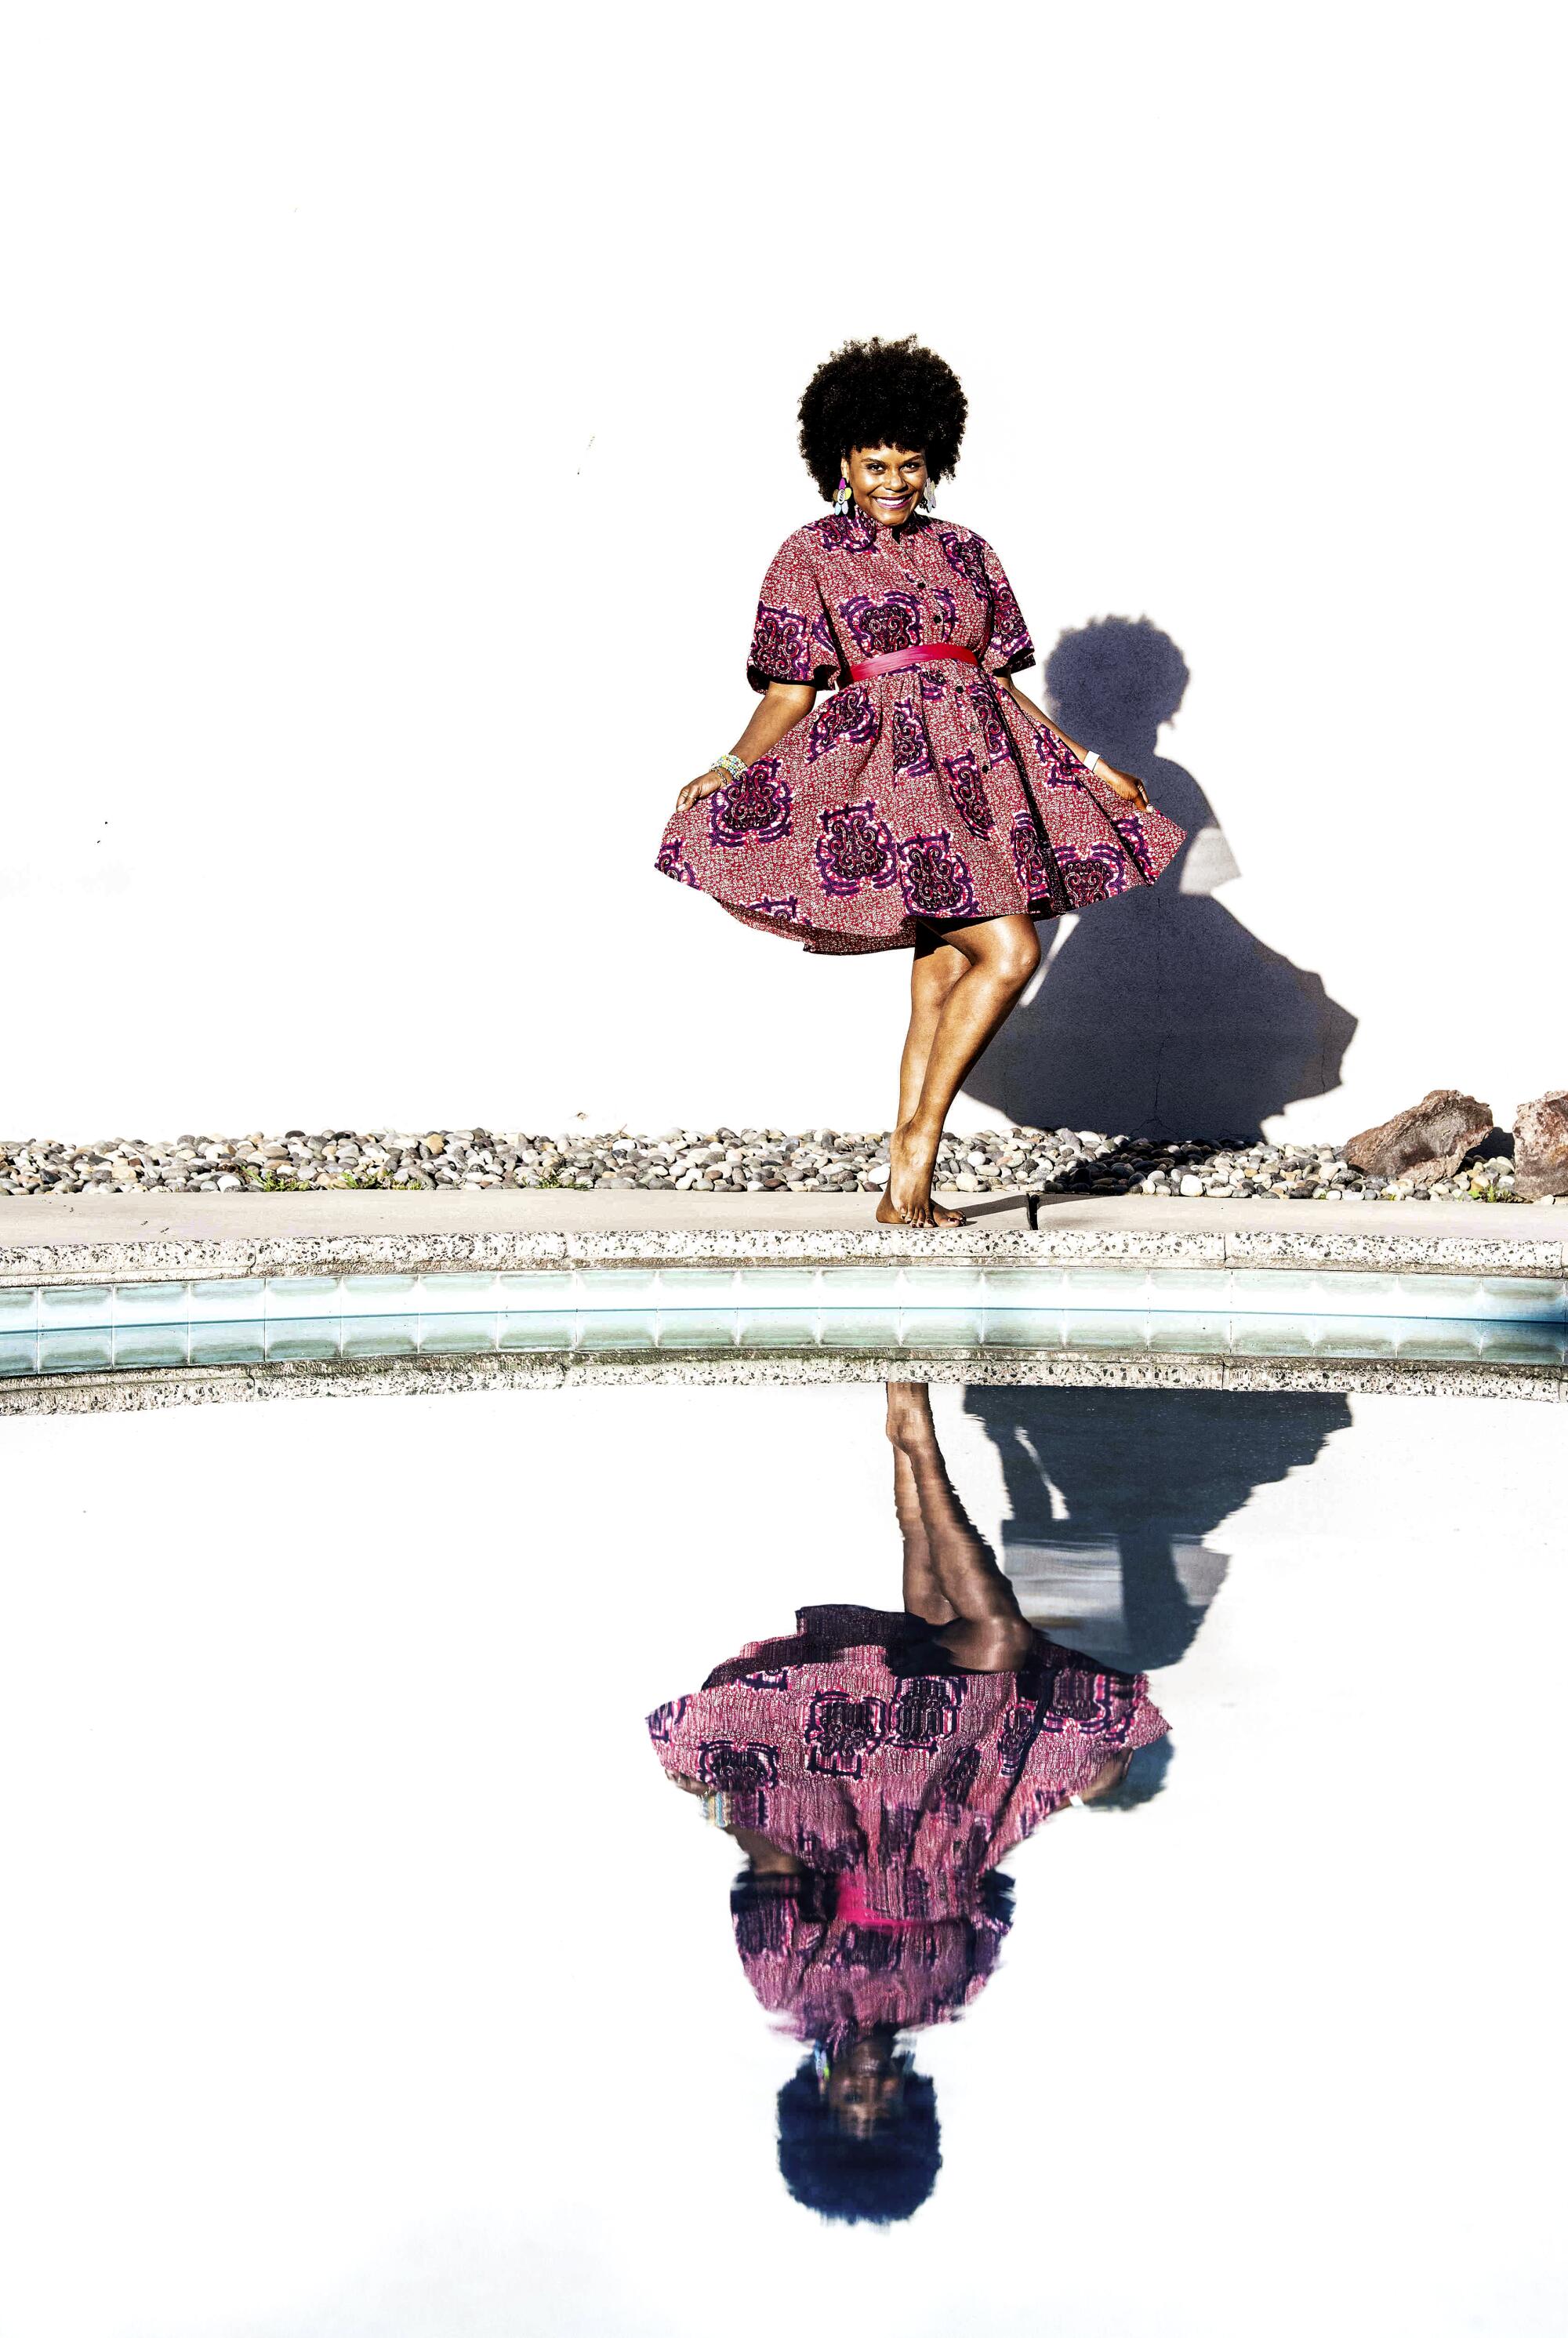 Tabitha Brown poses over a reflection of herself in a body of water outdoors.